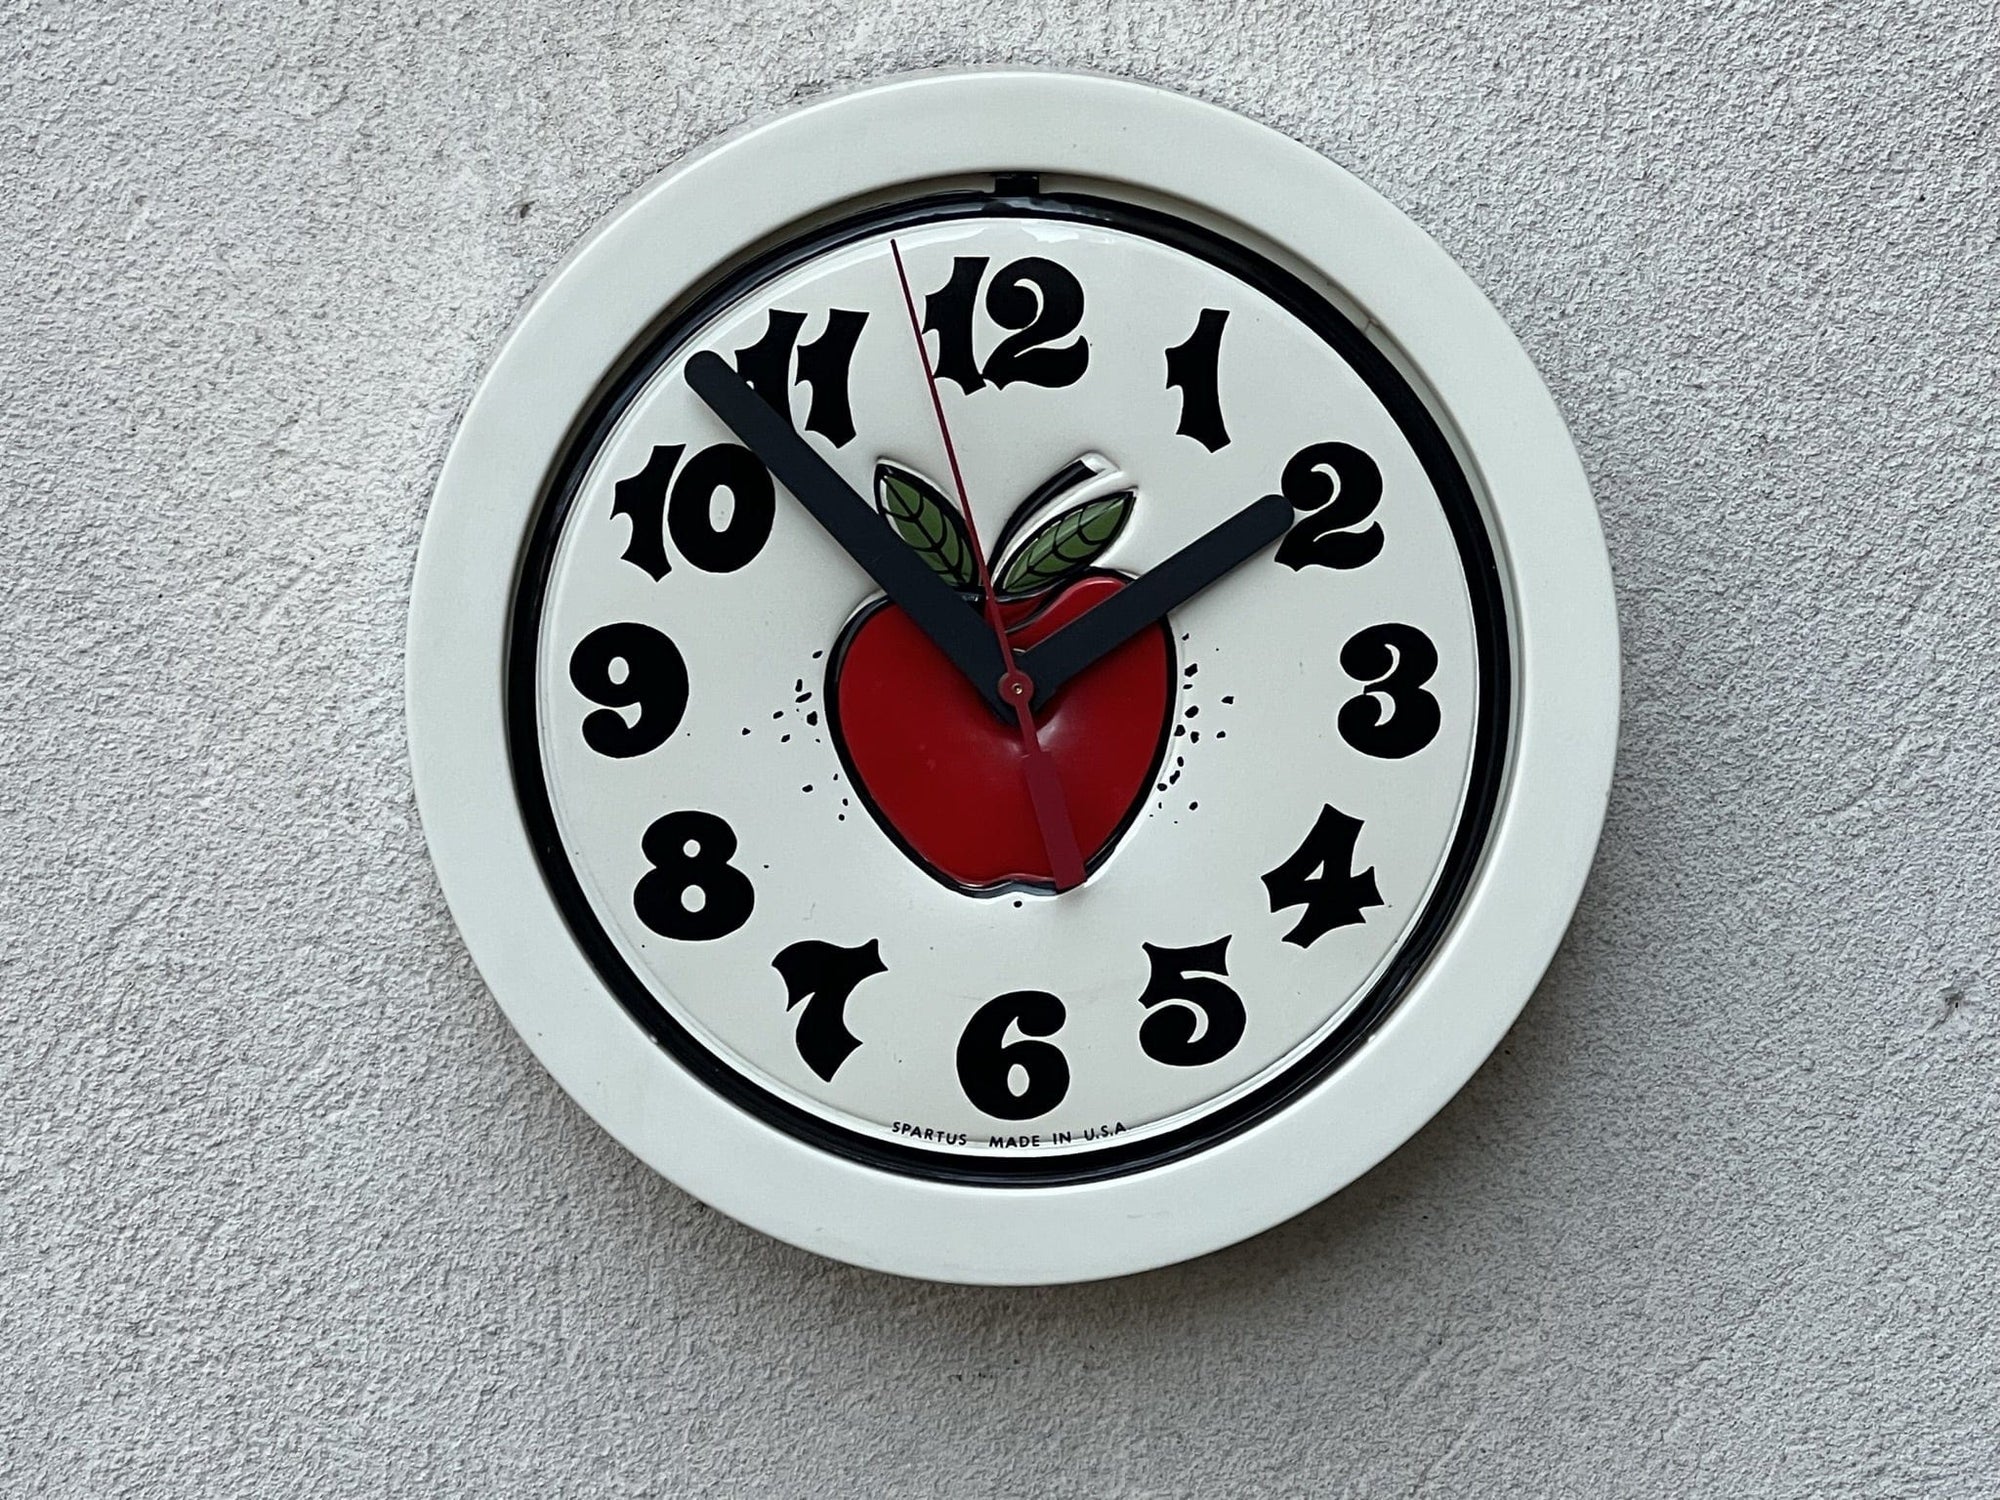 I Like Mikes Mid Century Modern Wall Clocks Vintage Round White Red Apple Kitchen Wall Clock by Spartus with Updated Quartz Movement